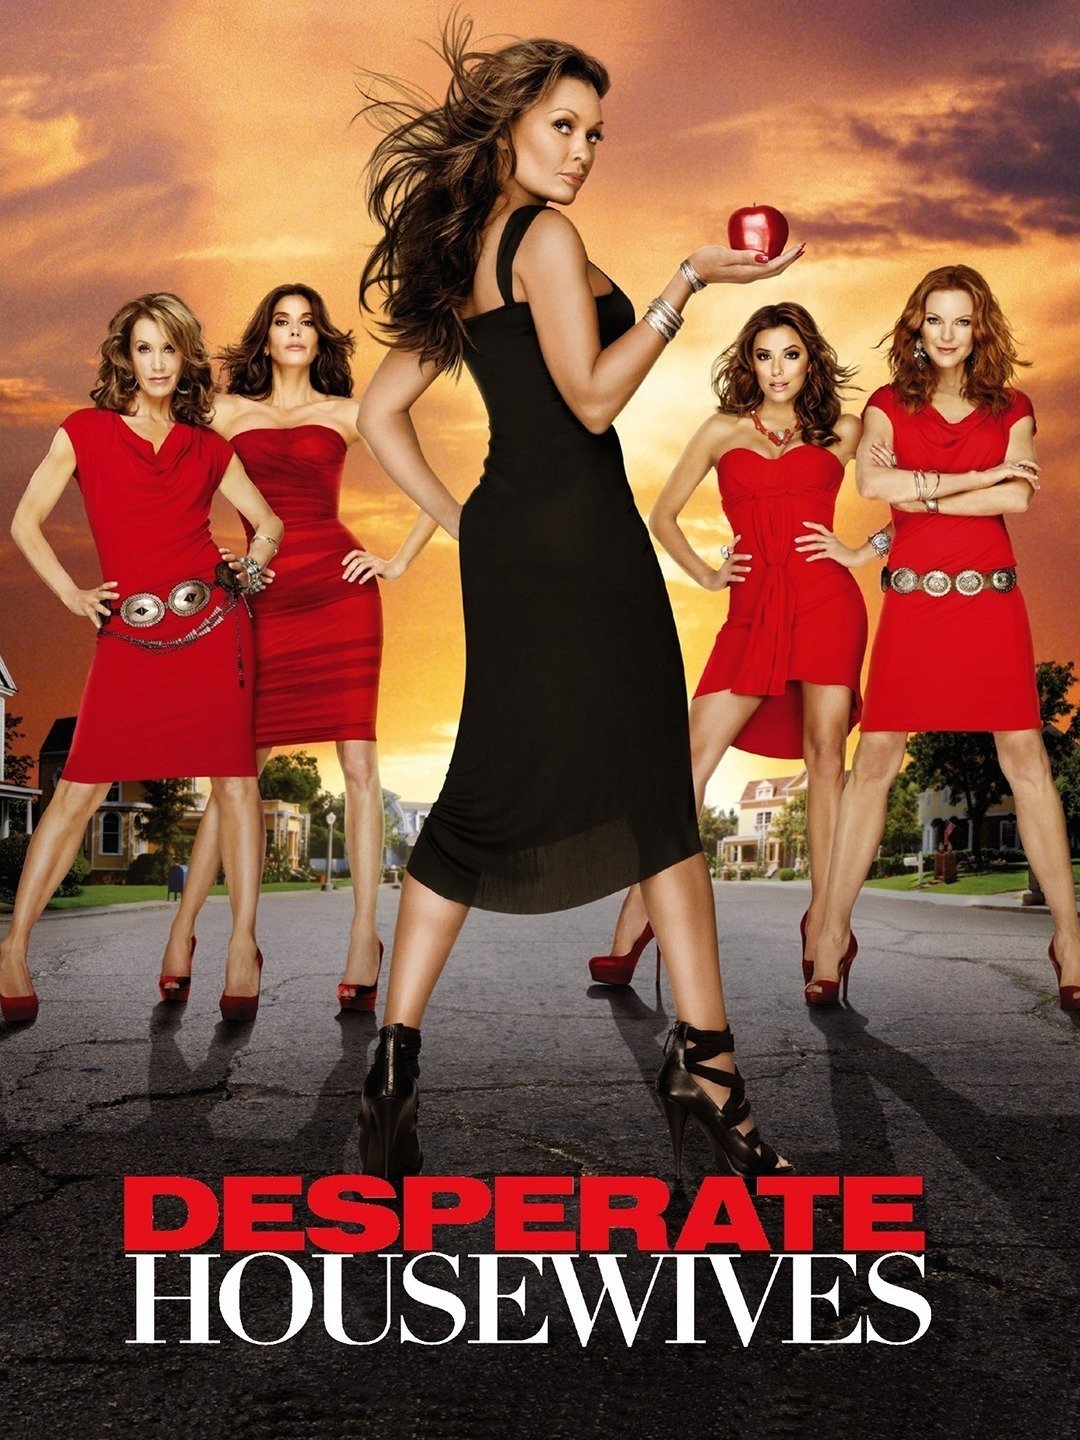 the sexy women of desperate housewives Sex Images Hq